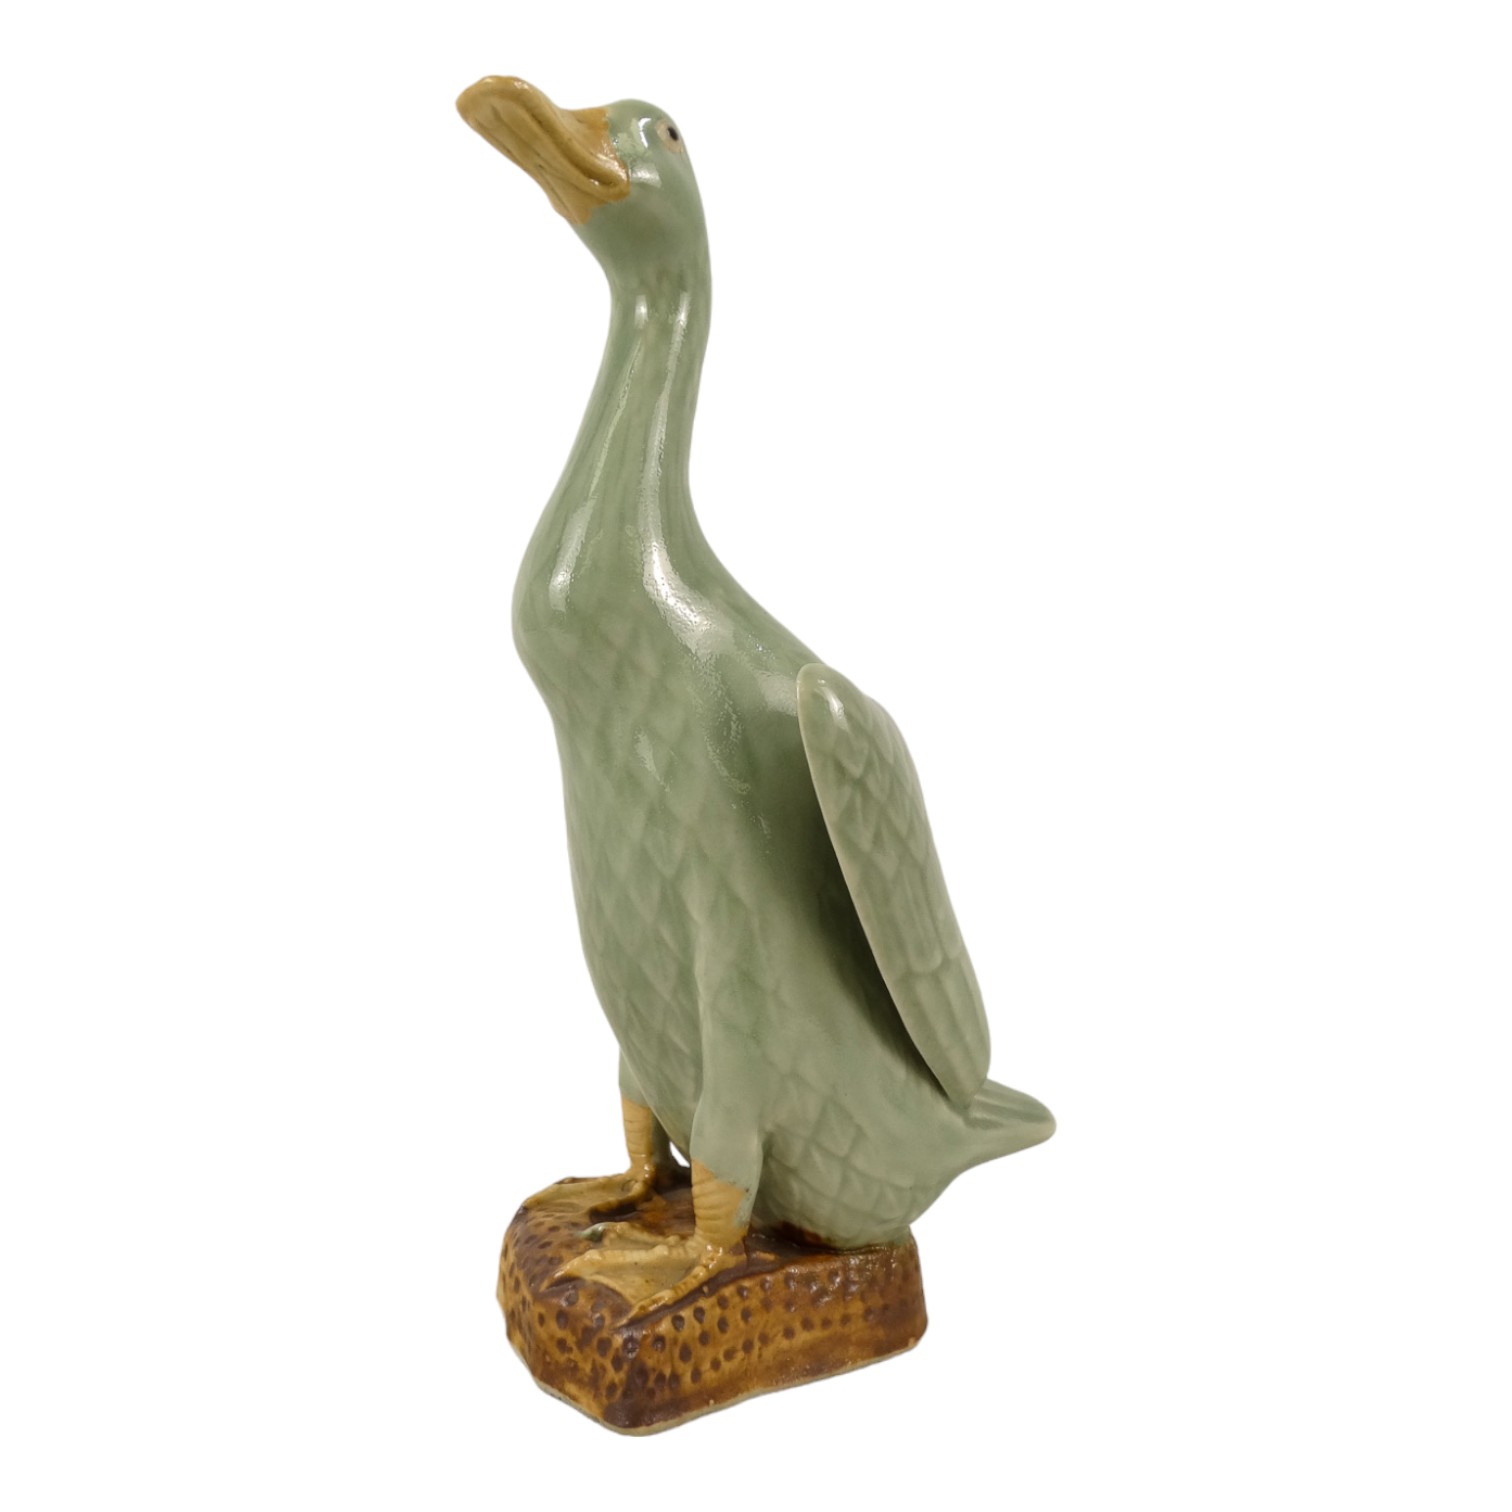 A Chinese figure of a running duck - green glazed, 24cm high